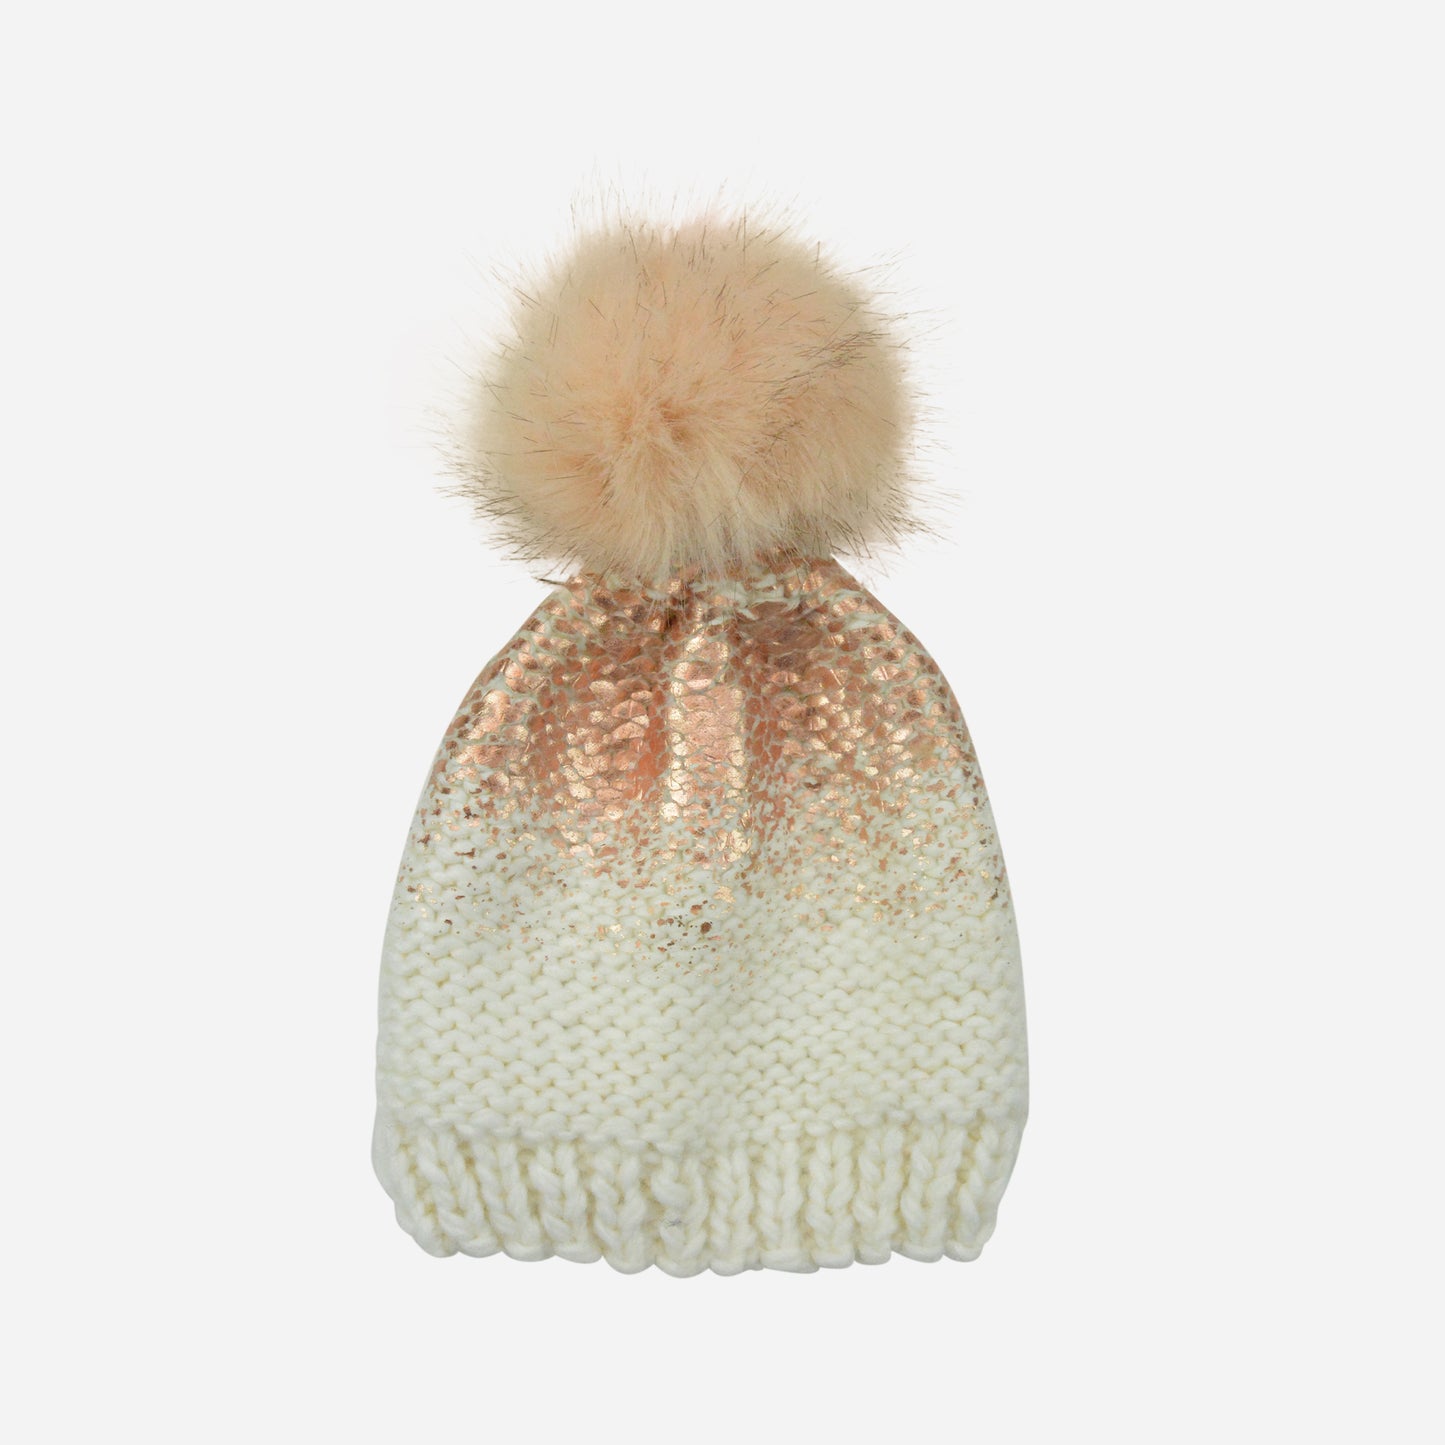 Pearl Metallic Hat with Fur Pom, Cream and Rose Gold